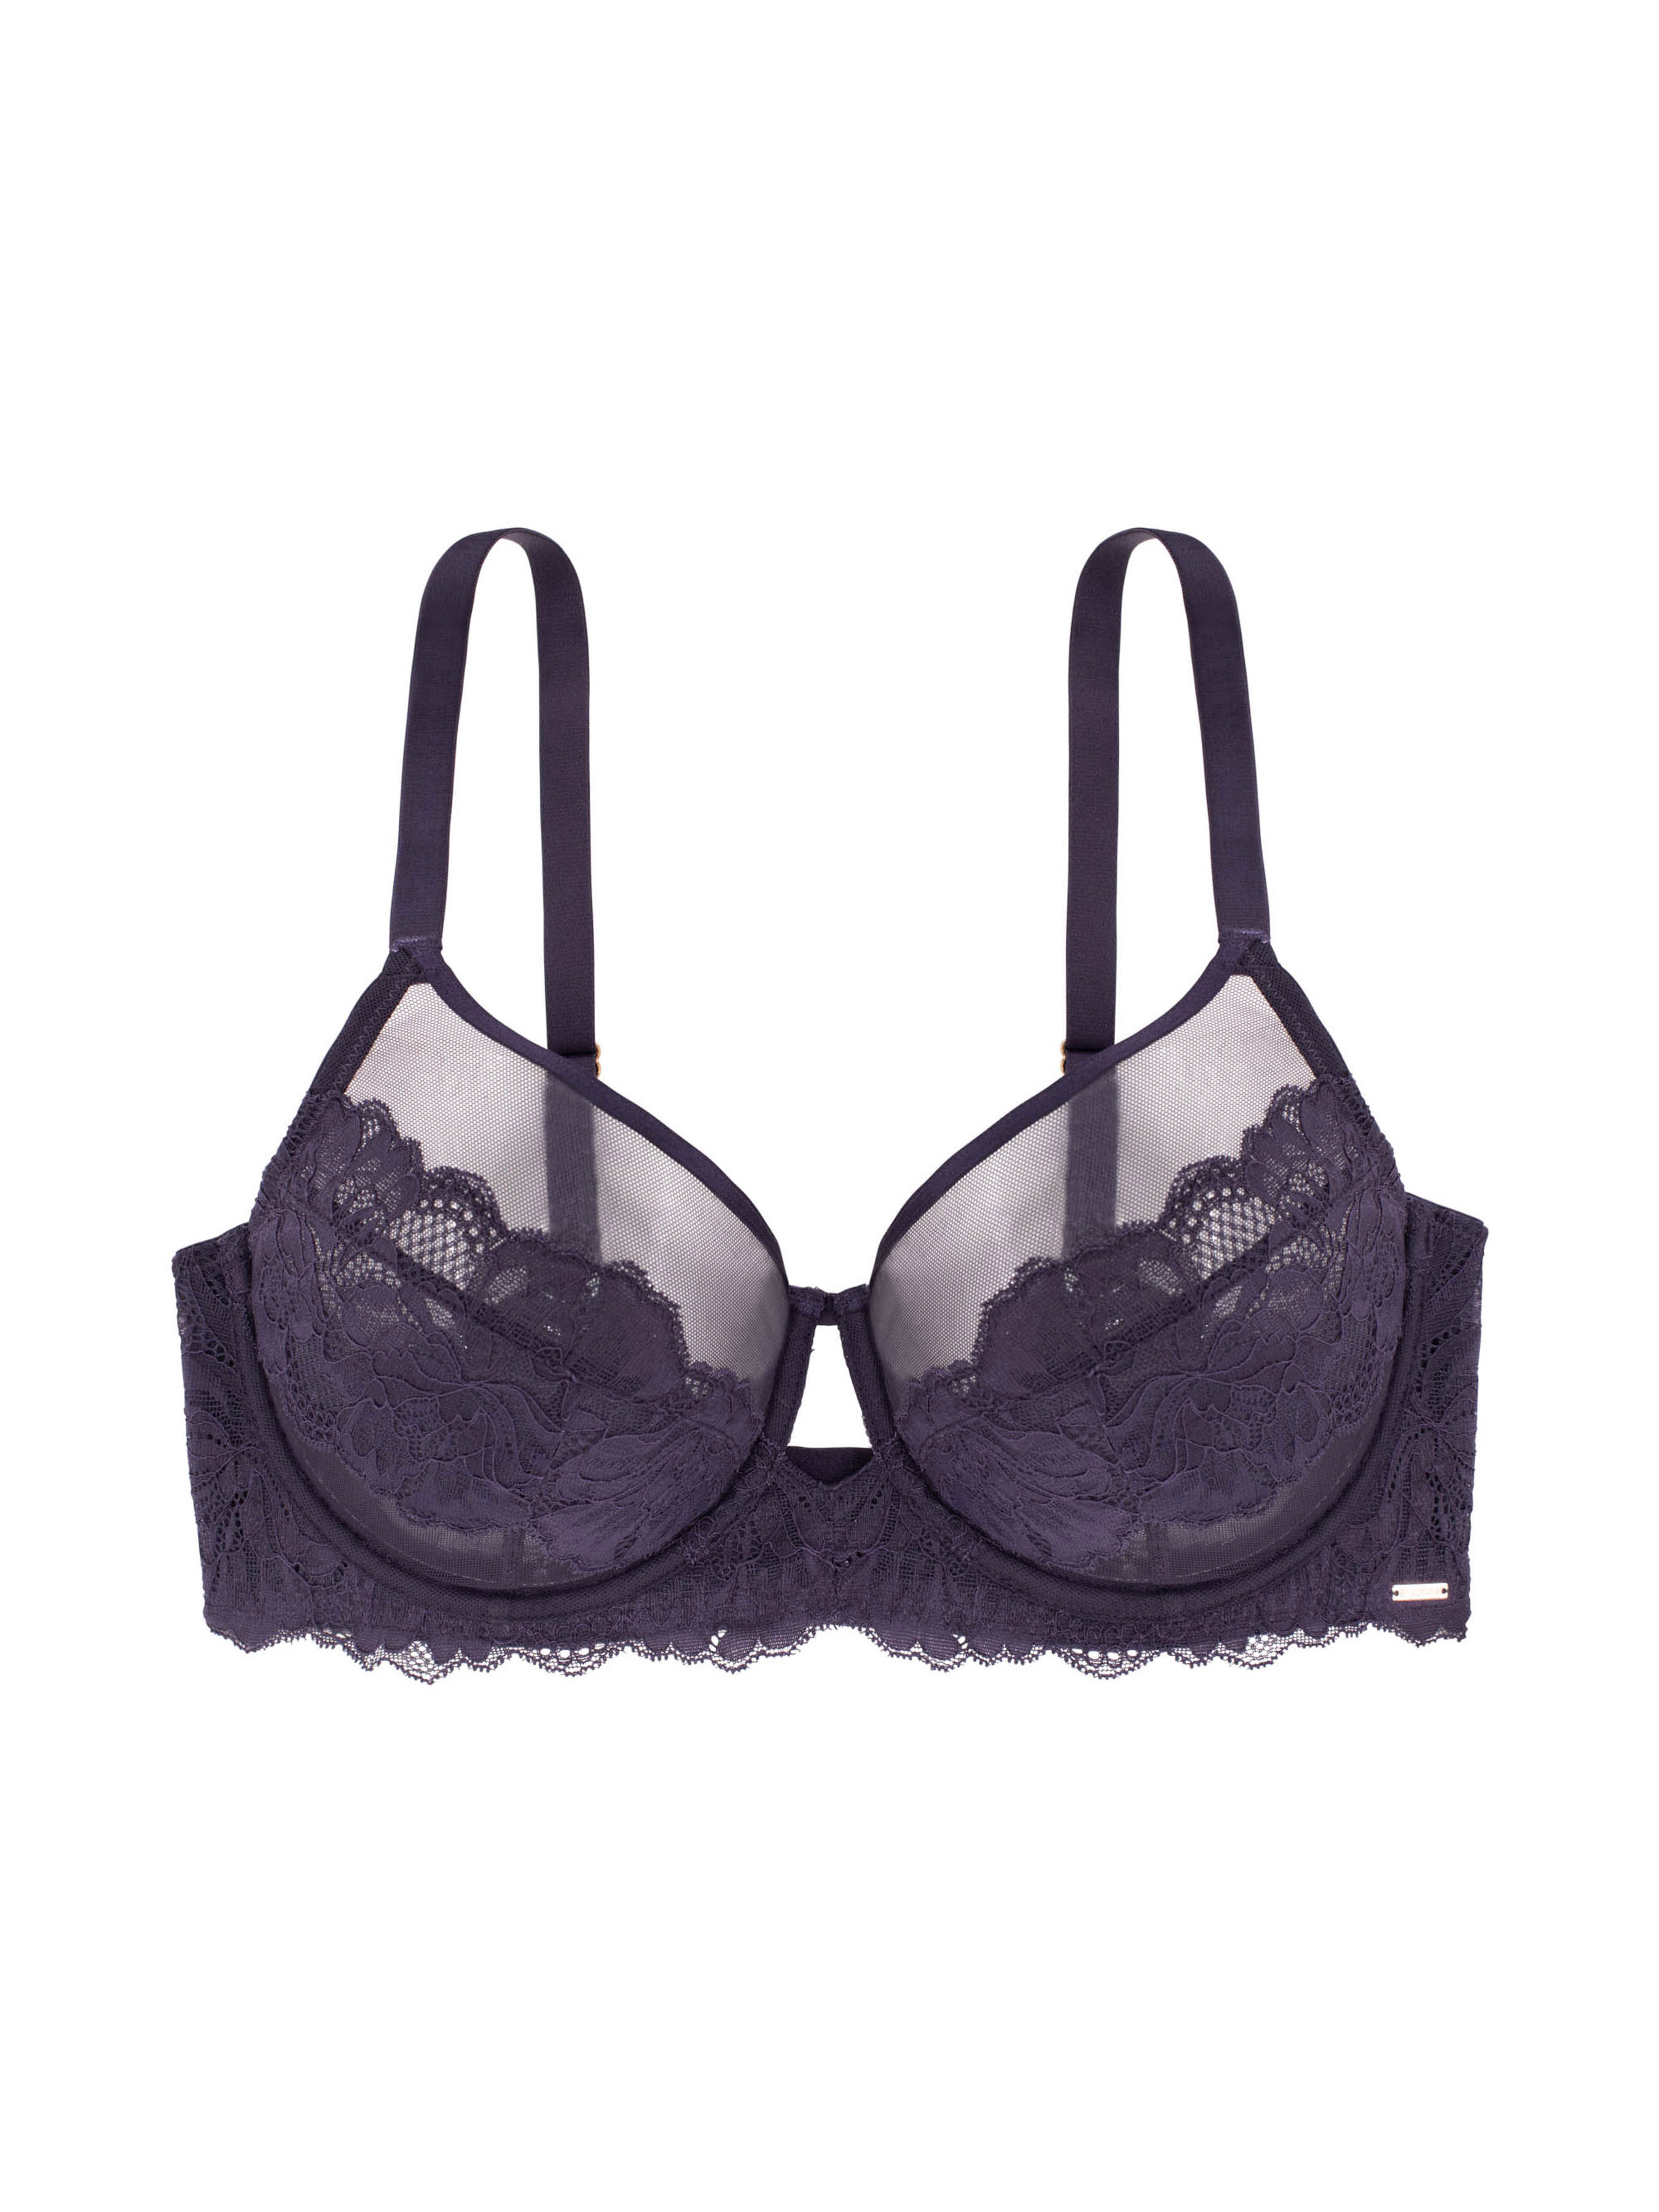 Clovia Padded Non-Wired Solid Bridal Bra in Black - Lace at Rs 691.00, Lace  Bra